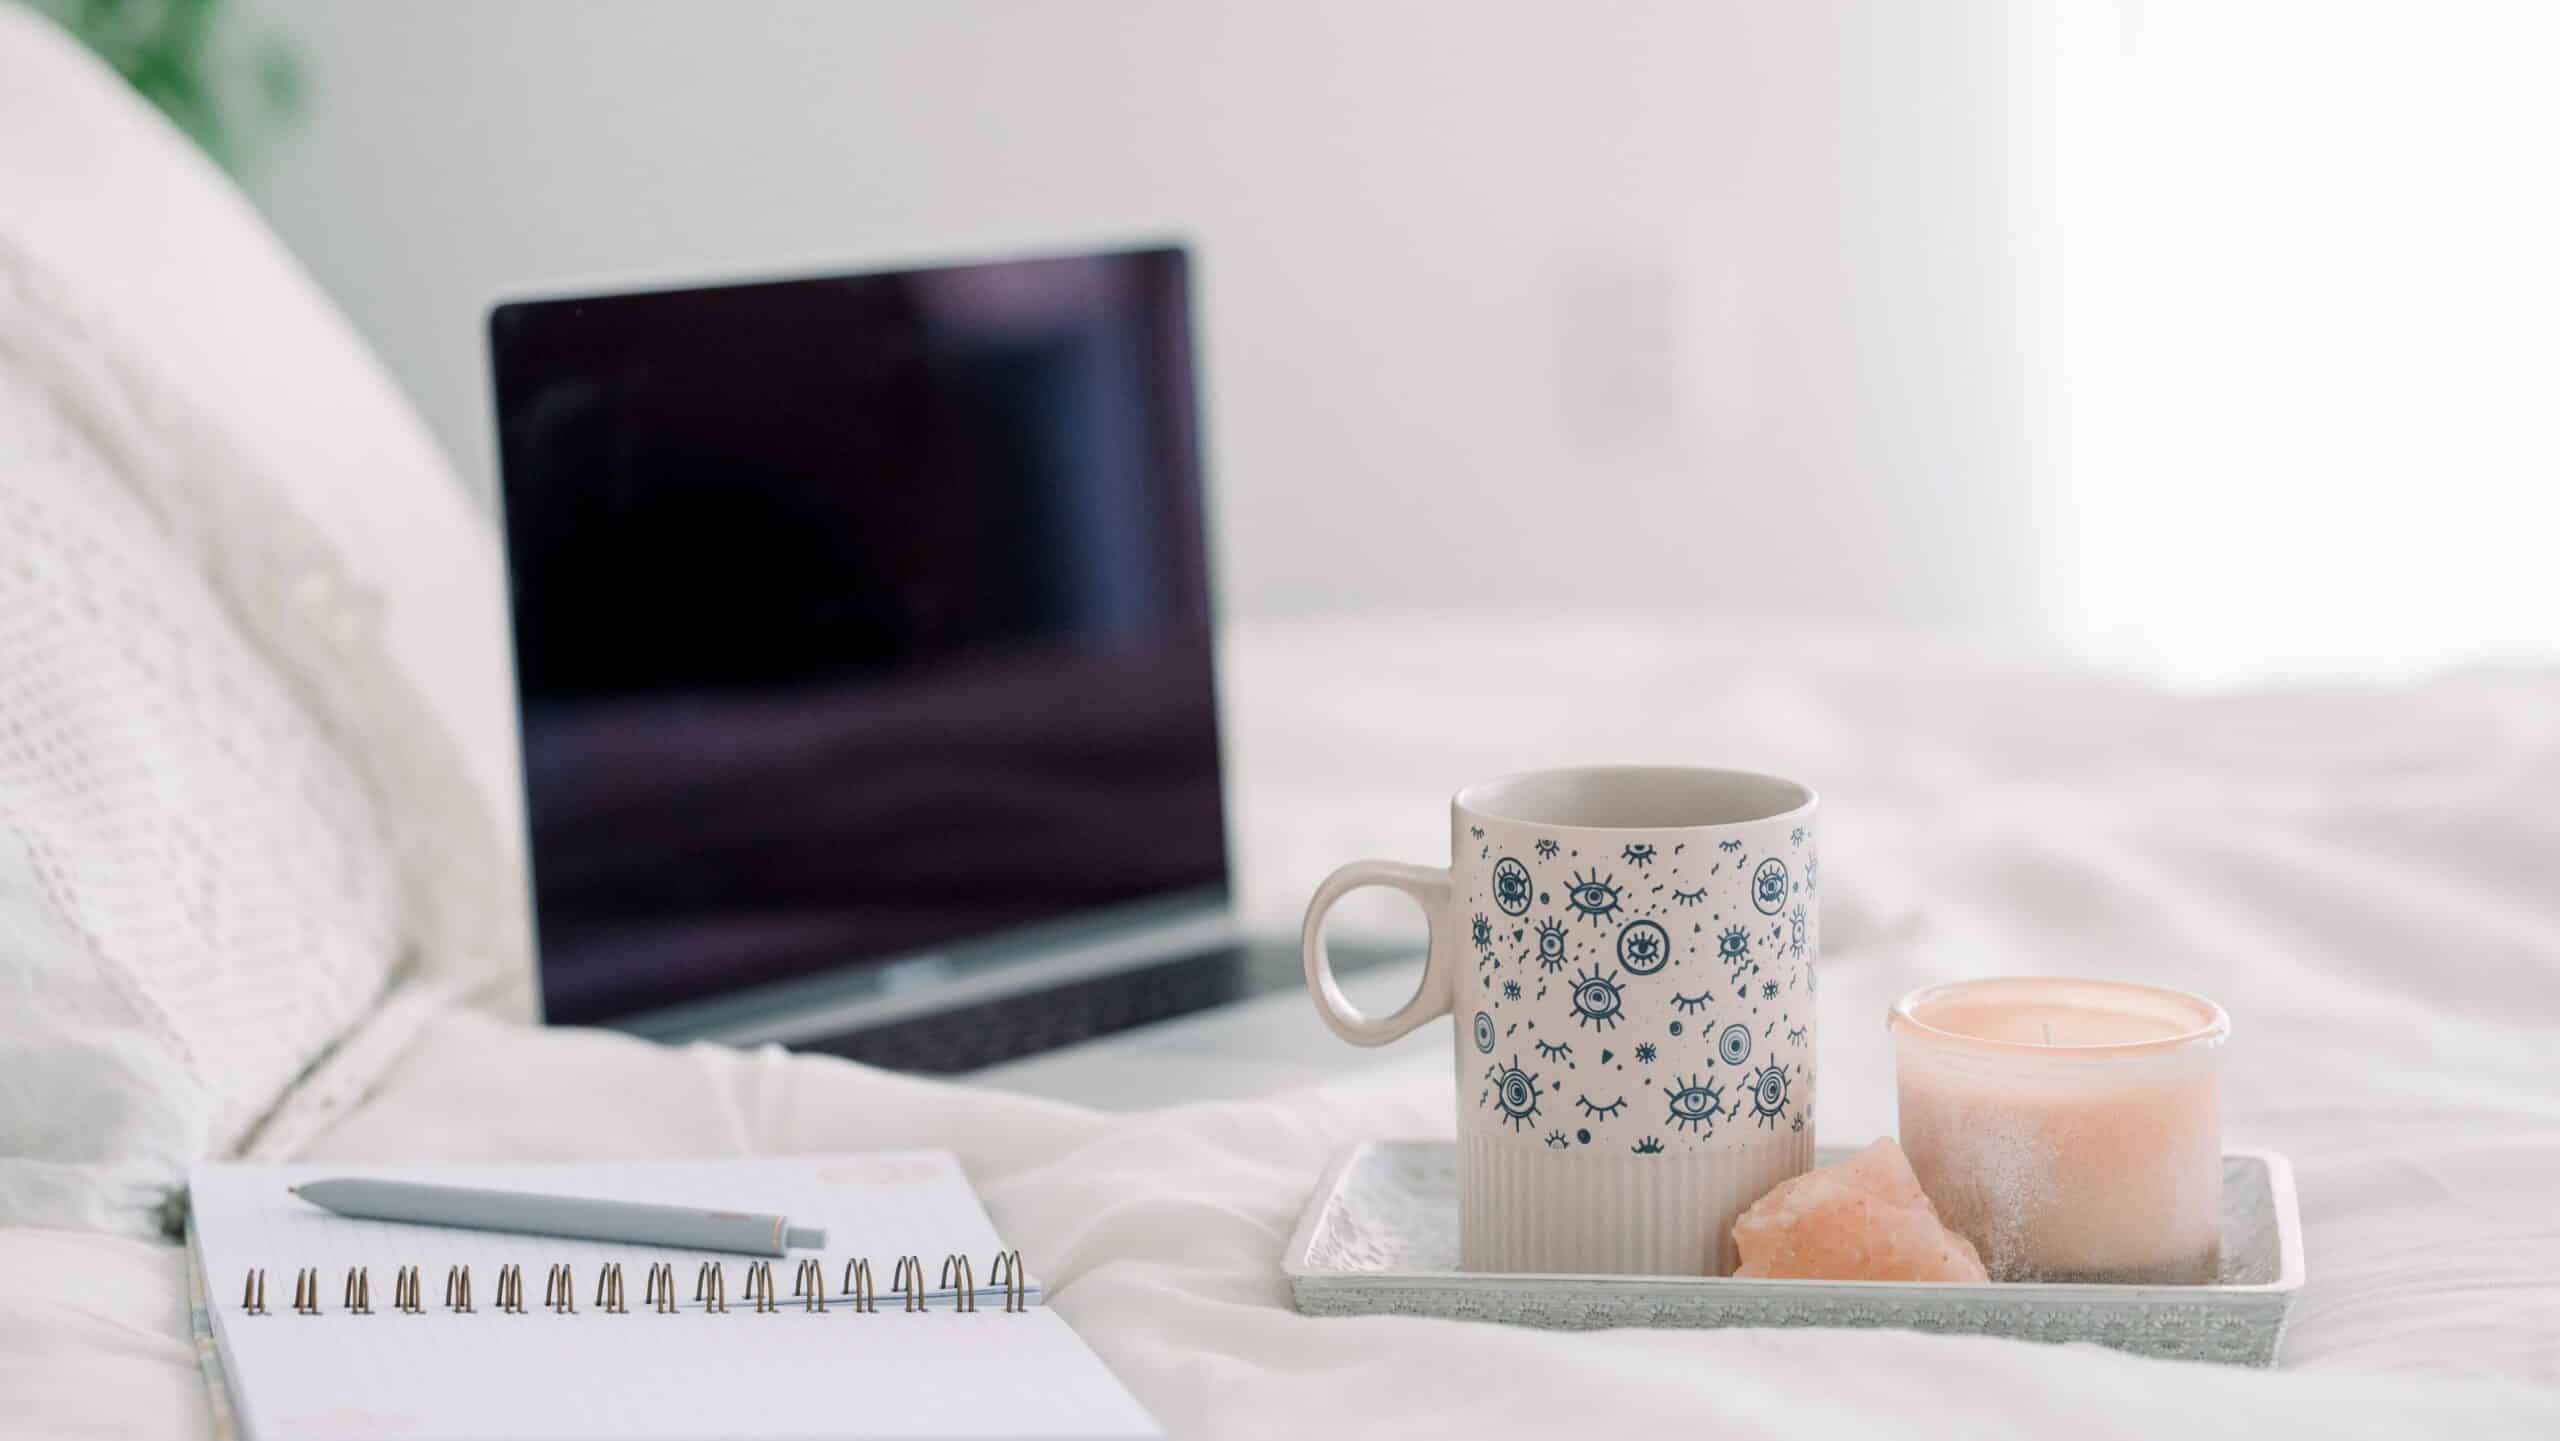 journaling, tea, and a candle - benefits of sleeping with crystals under your pillow